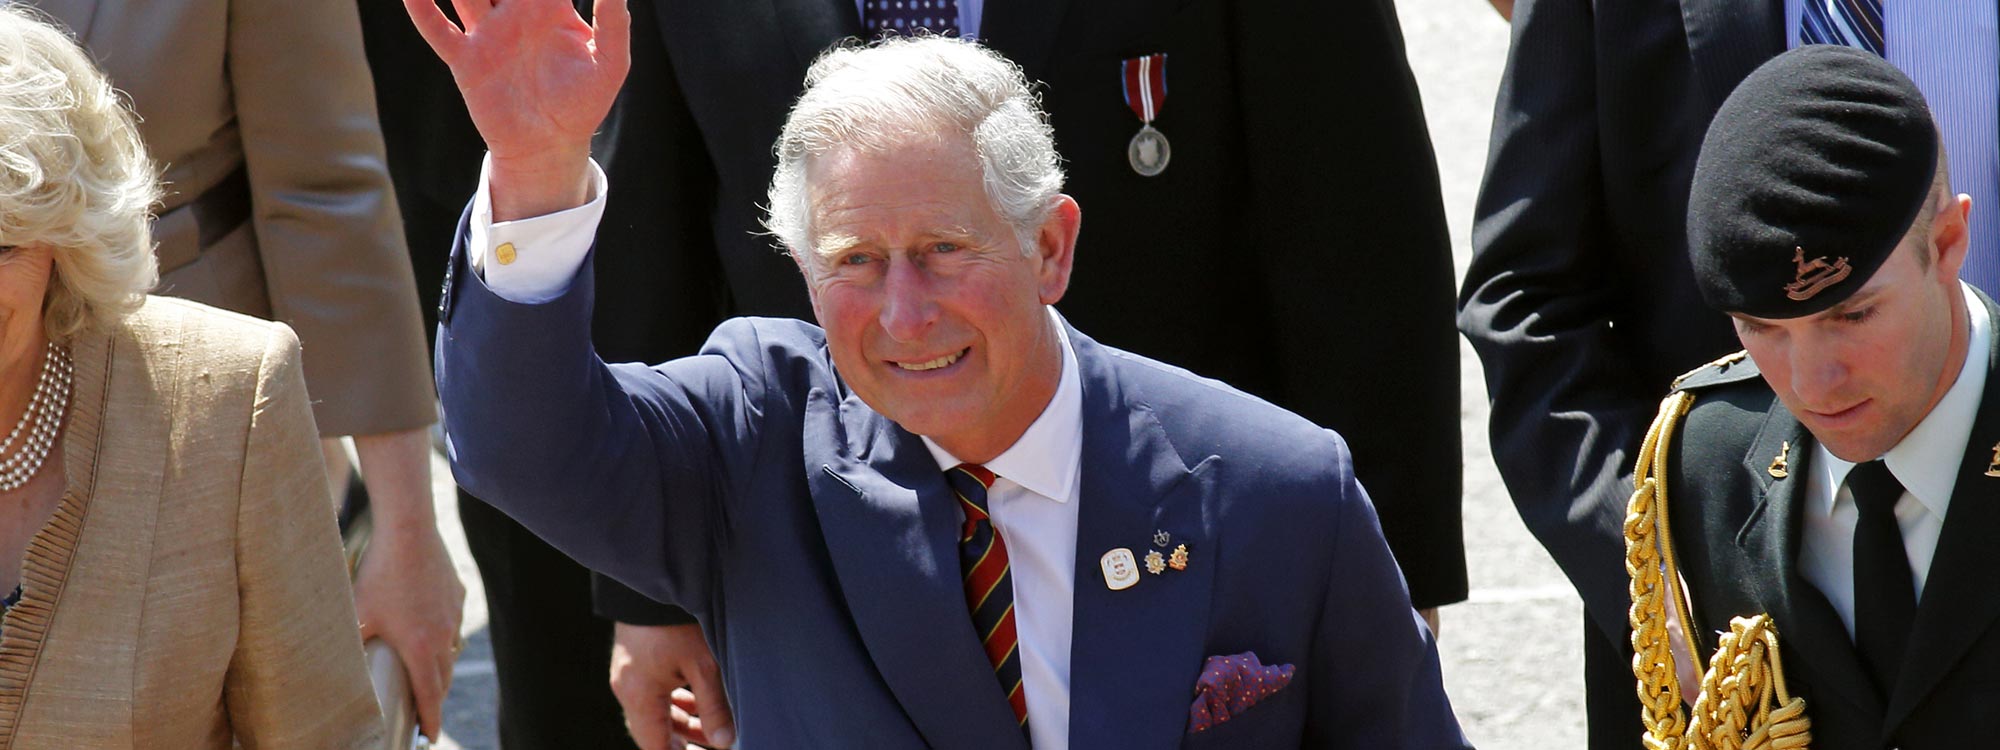 Prince of Wales Birthday